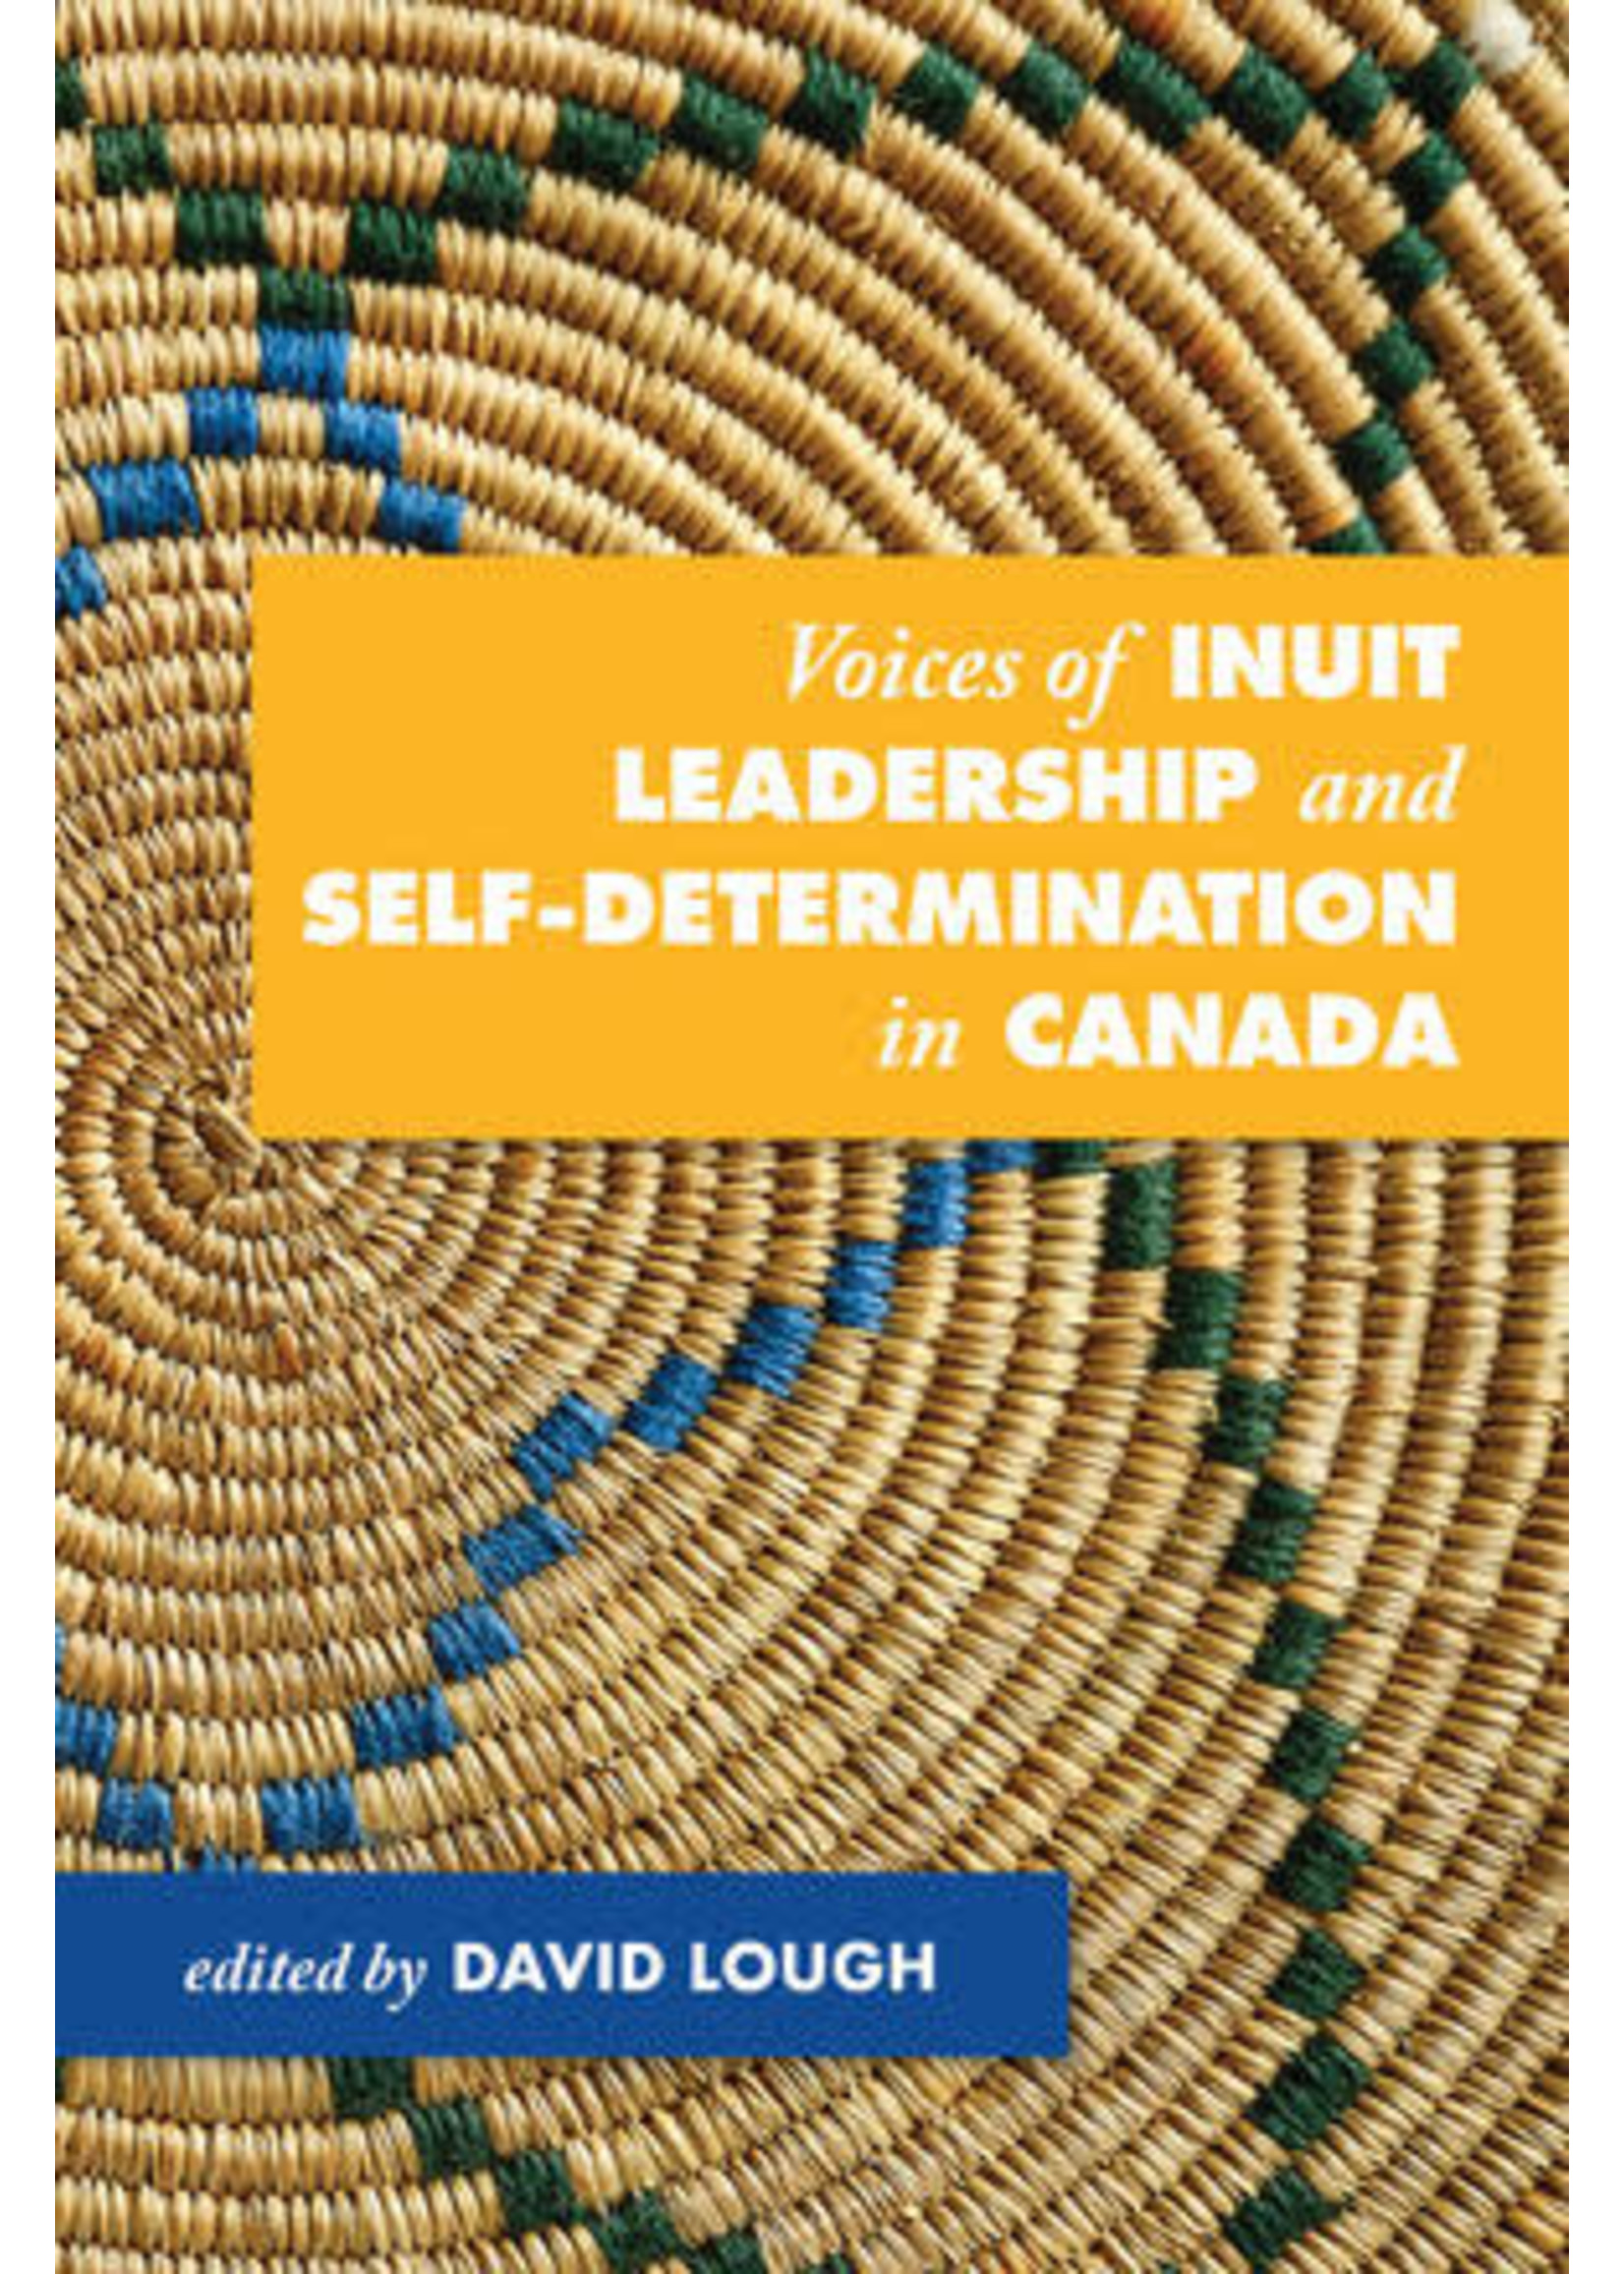 Voices of Inuit Leadership and Self-Determination in Canada by David Lough